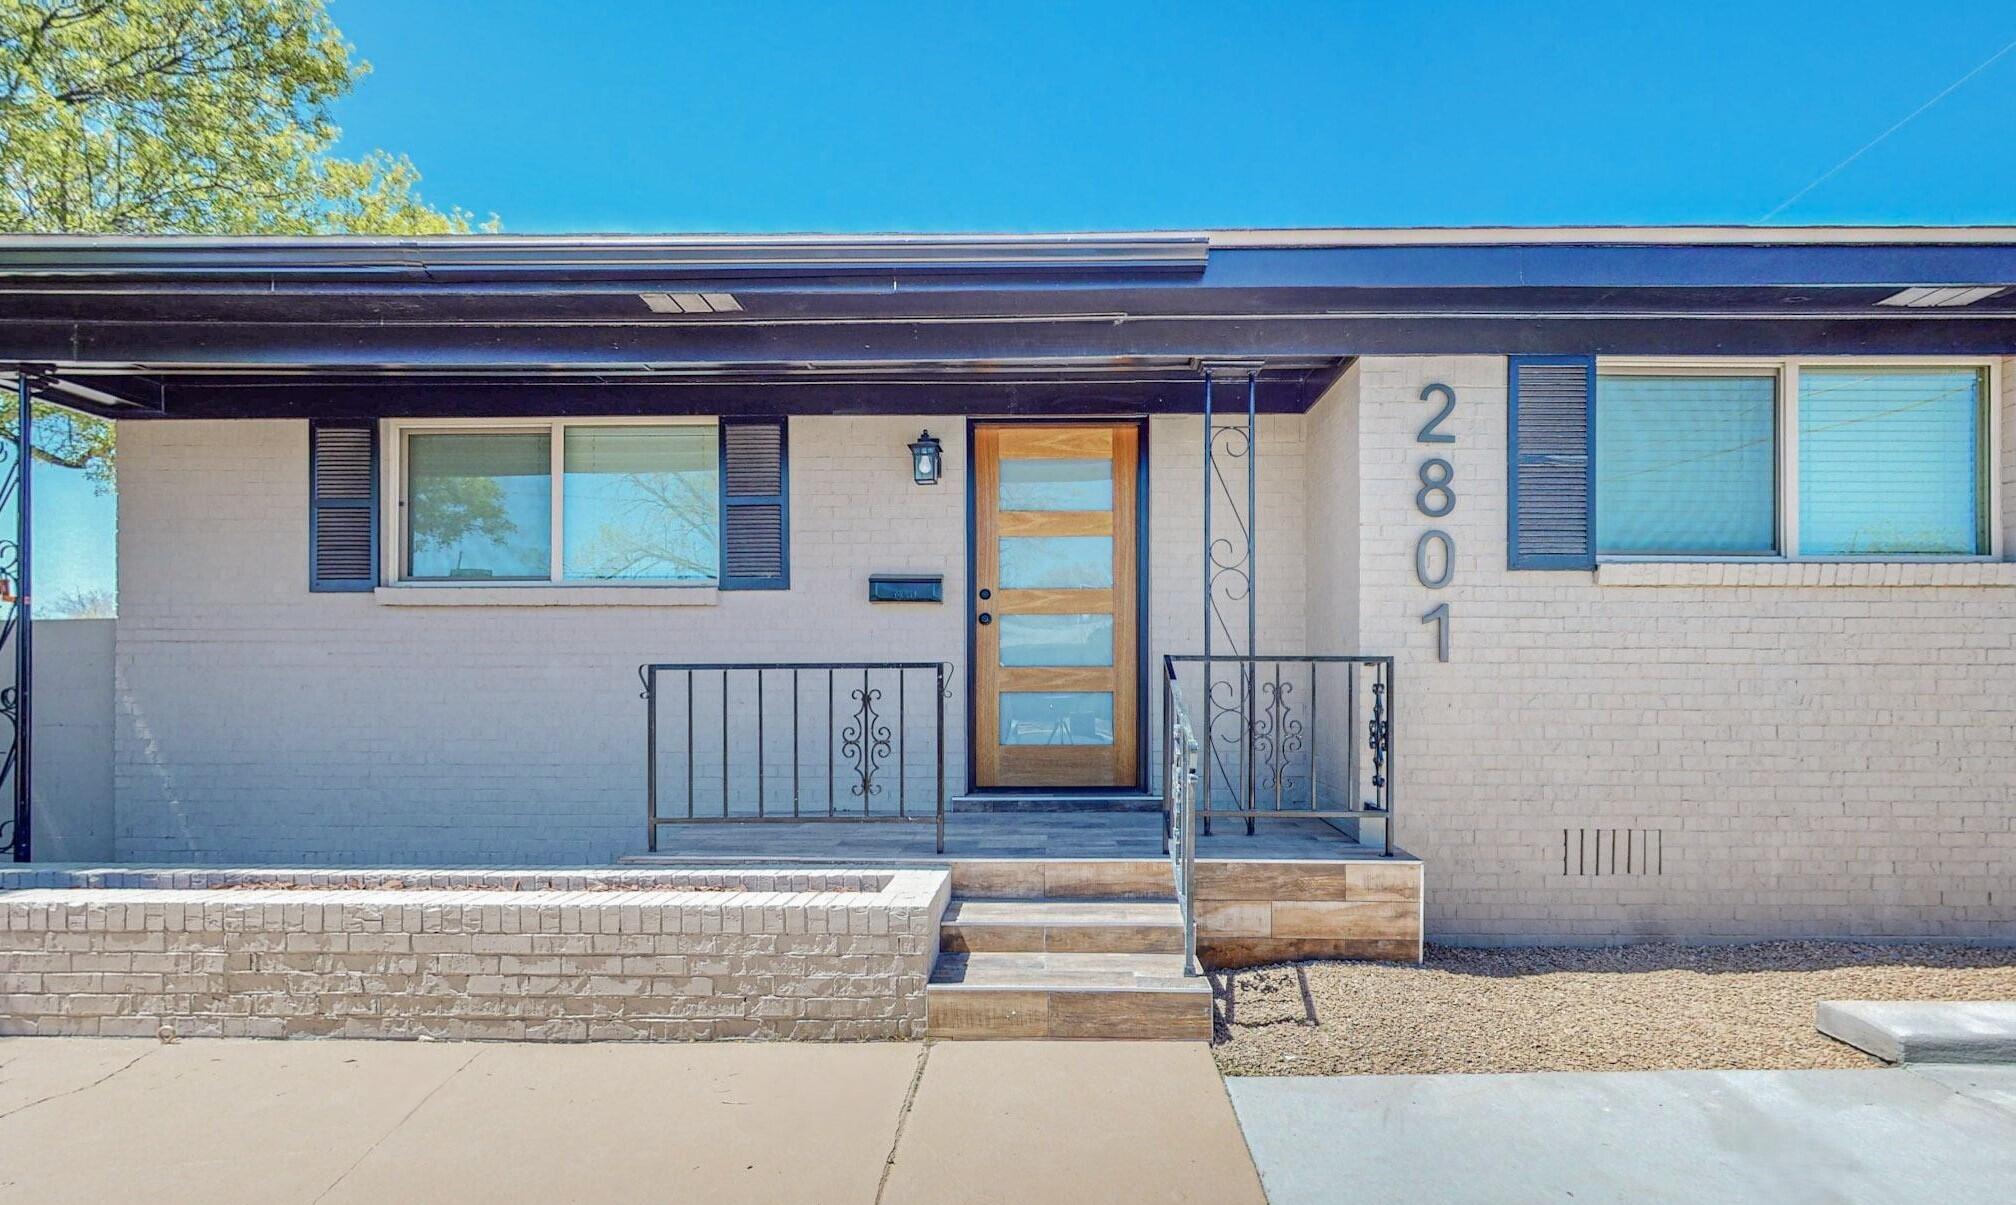 Beautifully updated contemporary home in great Uptown neighborhood. Features open concept plan w/tons of natural light, 2 separate family areas and a large wood burning fireplace. Modernized kitchen is equipped with stainless appliances, quartz counters, classic subway backsplash, tons of cabinets, and oversized center island. Two fully reimagined bathrooms feature custom floor-to-ceiling tile, floating cabinets and all new fixtures. New low-E thermal windows throughout plus new refrigerated a/c. Two separate full-size driveways ensure lots of off-street parking. Freshly xeriscaped front & rear. Central location is close to malls, dining, hospitals, services and more. Don't miss this fully turn-key home in the heart of Uptown, you'll want to move in right away!